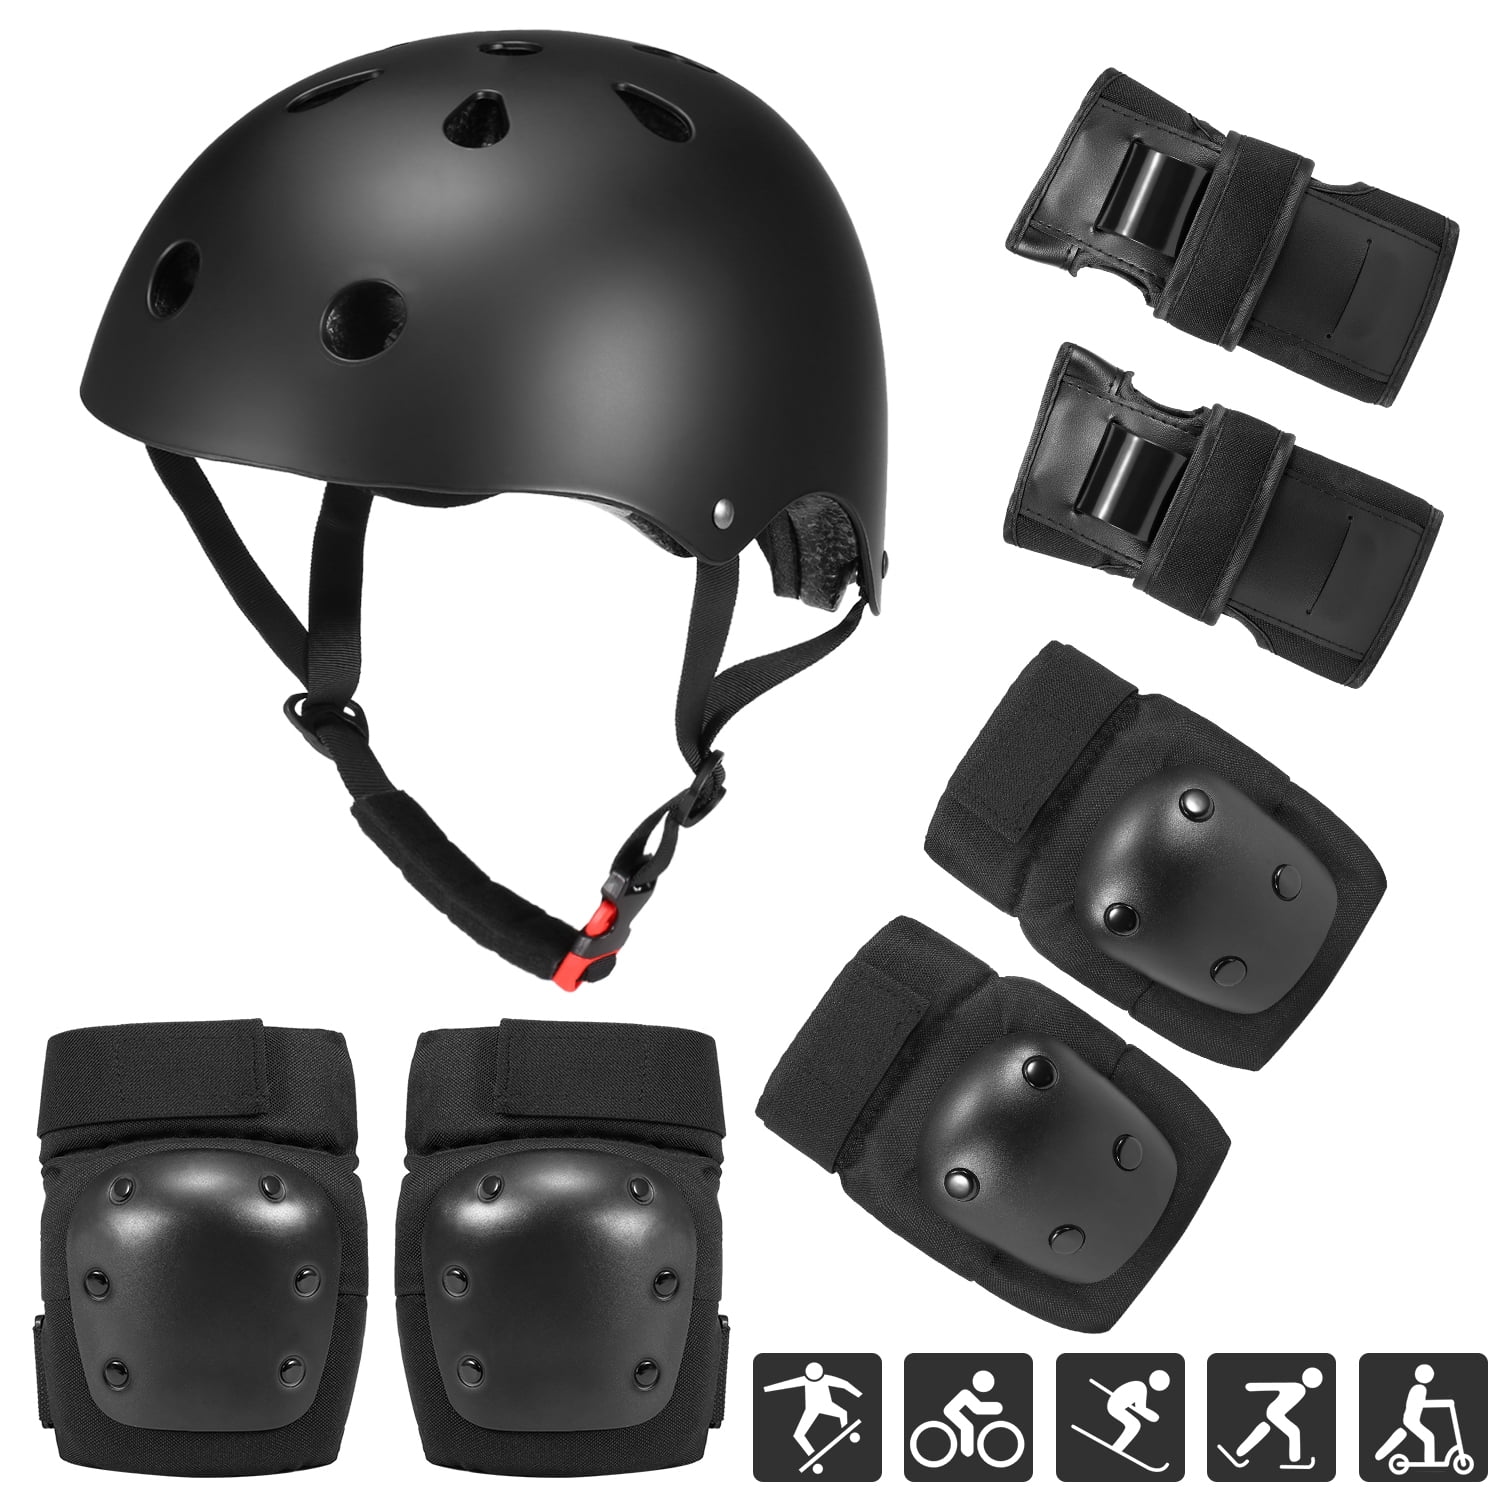 Safety Pads Set for Roller Roller Blade Skating Include Helmet Elbow Pads Knee Pads Wrist Guards 4-16 Years Old Cycling Scooter 7pcs Kids Outdoor Sports Protection Gear Set 